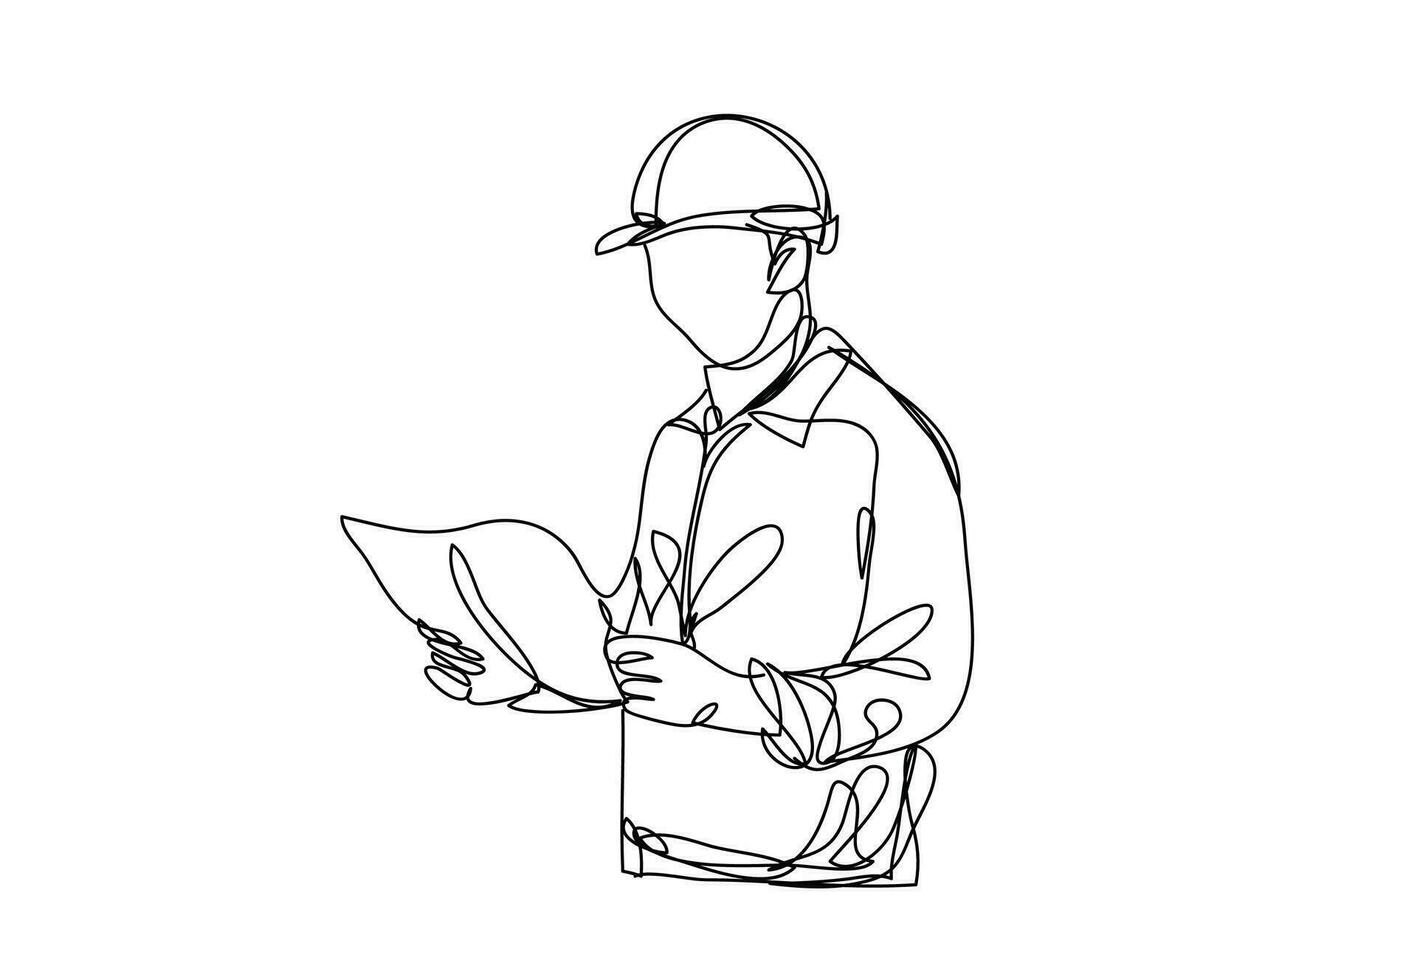 continuous line art , Civil engineer, Architects and worker, vector illustration